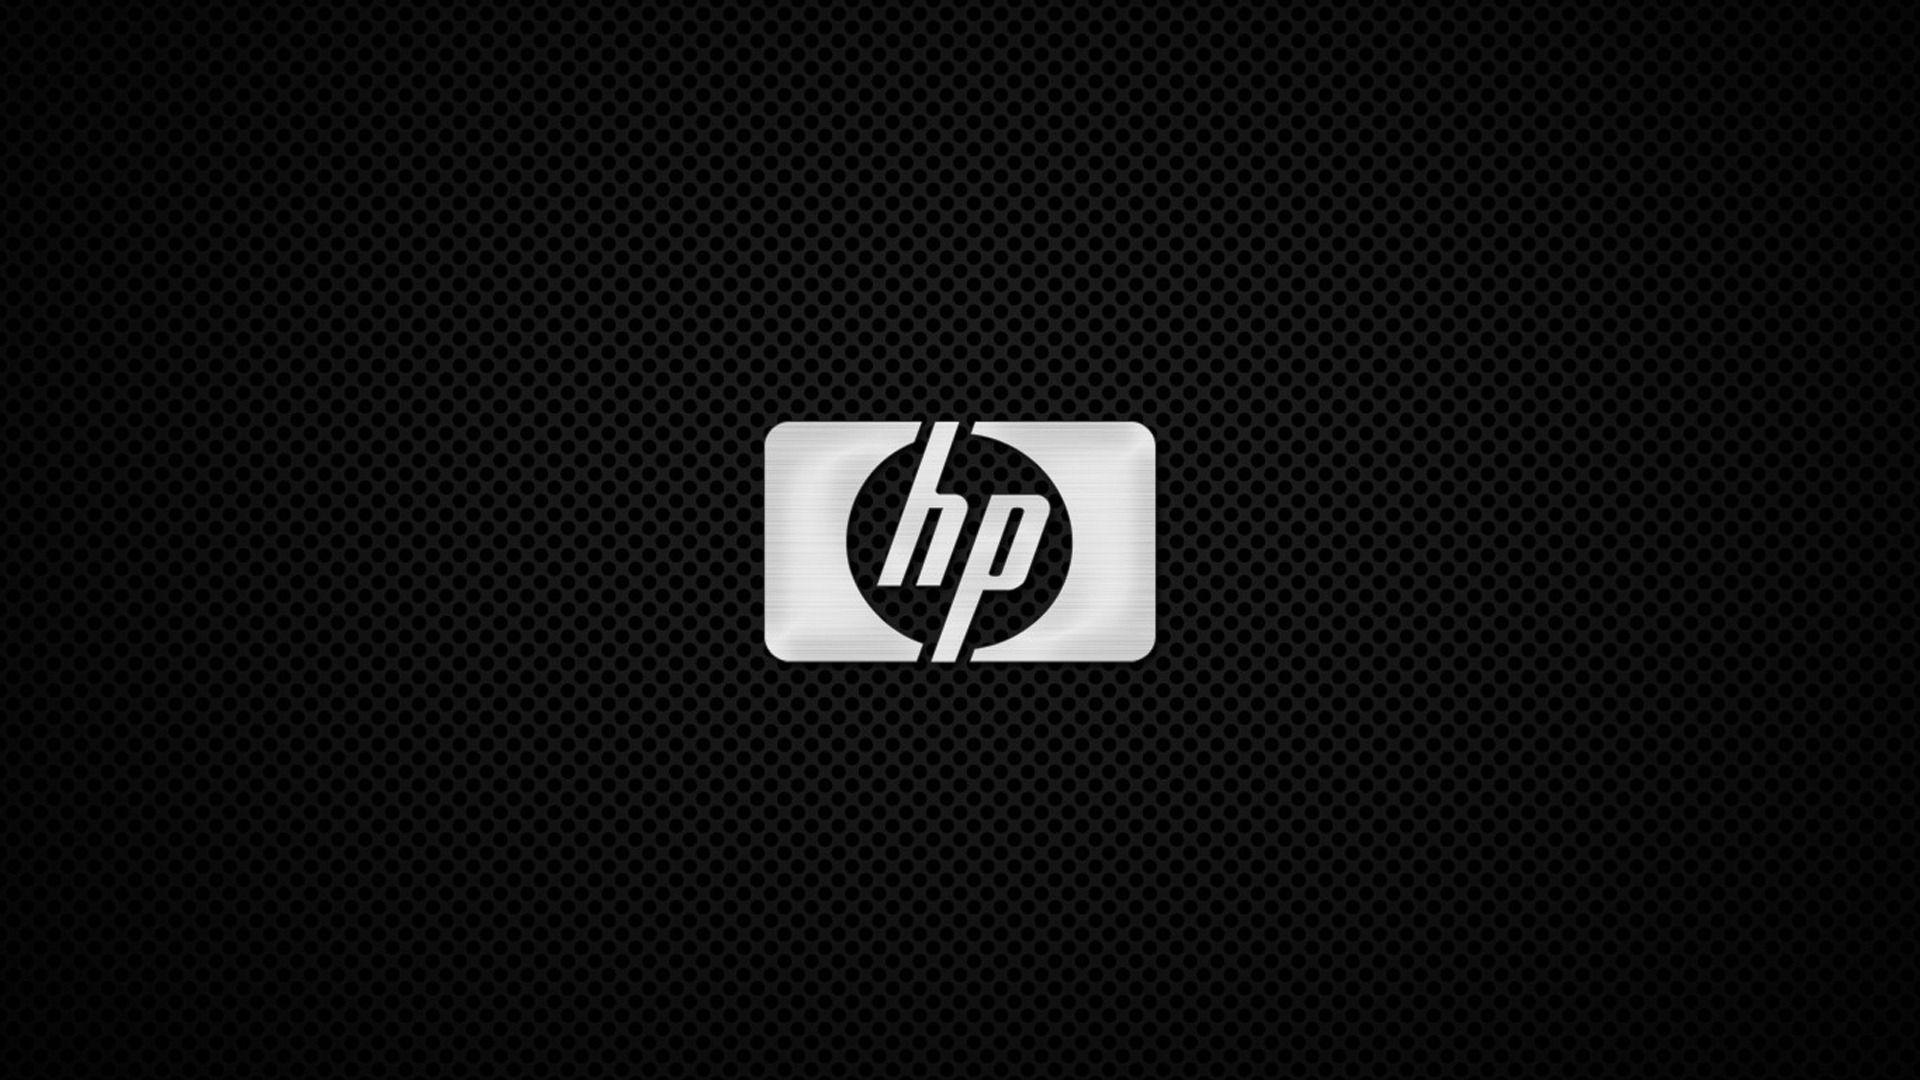 Latest HP Logo - HP logo on the grid wallpaper and image, picture, photo